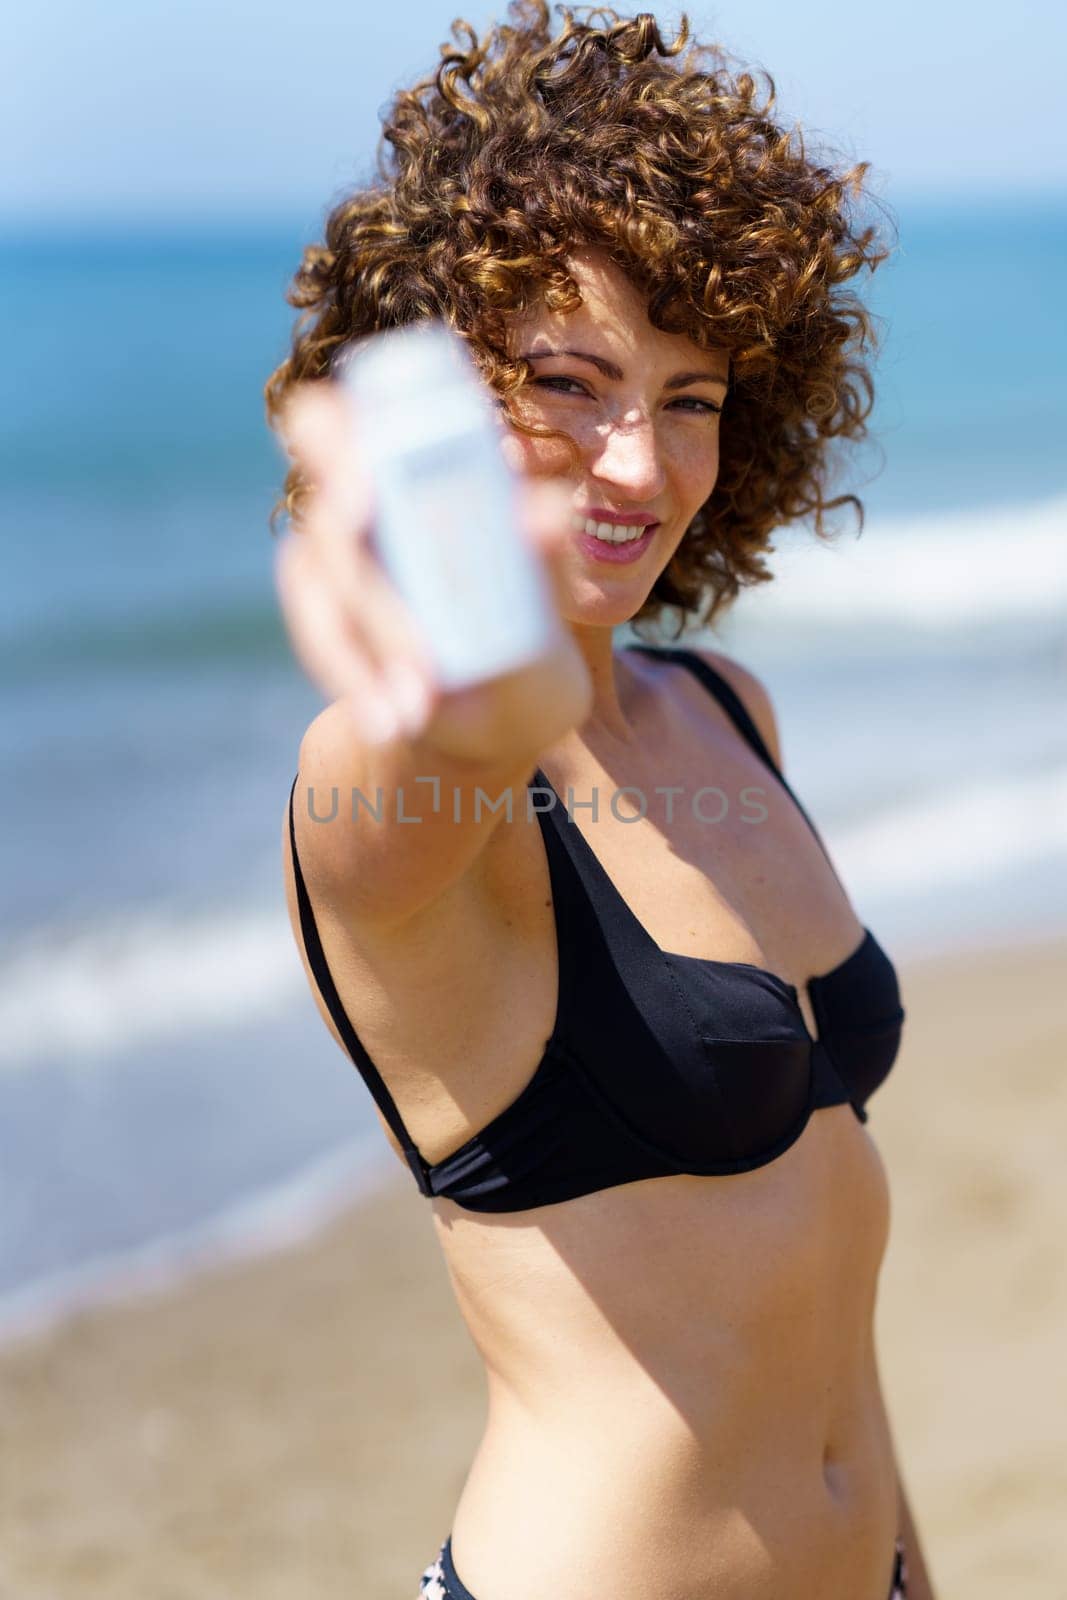 Smiling young female in bikini standing on sandy beach near waving sea and showing white bottle of sunblock cream